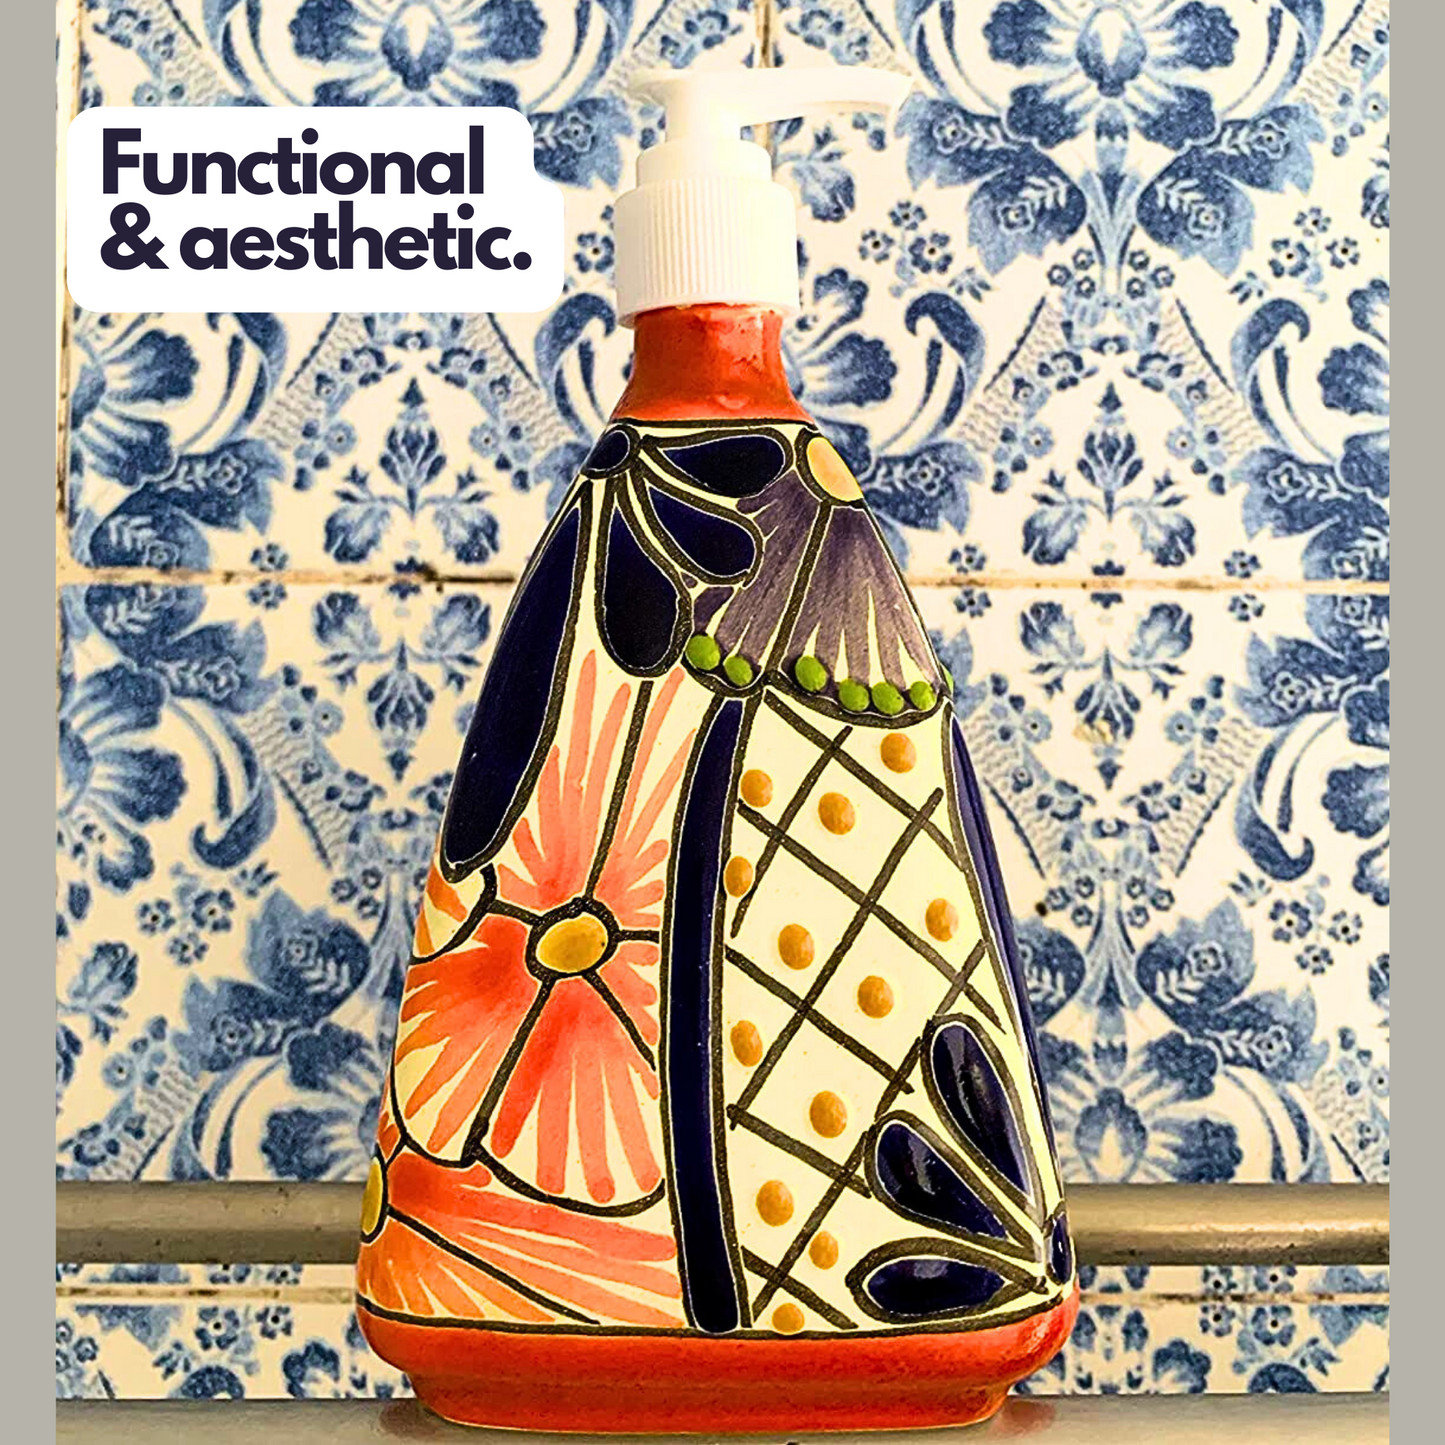 Pyramid-shaped Ceramic Soap Dispenser, hand-painted by Mexican artisans, perfect for adding a vibrant touch to kitchen or bathroom decor. In the bathroom